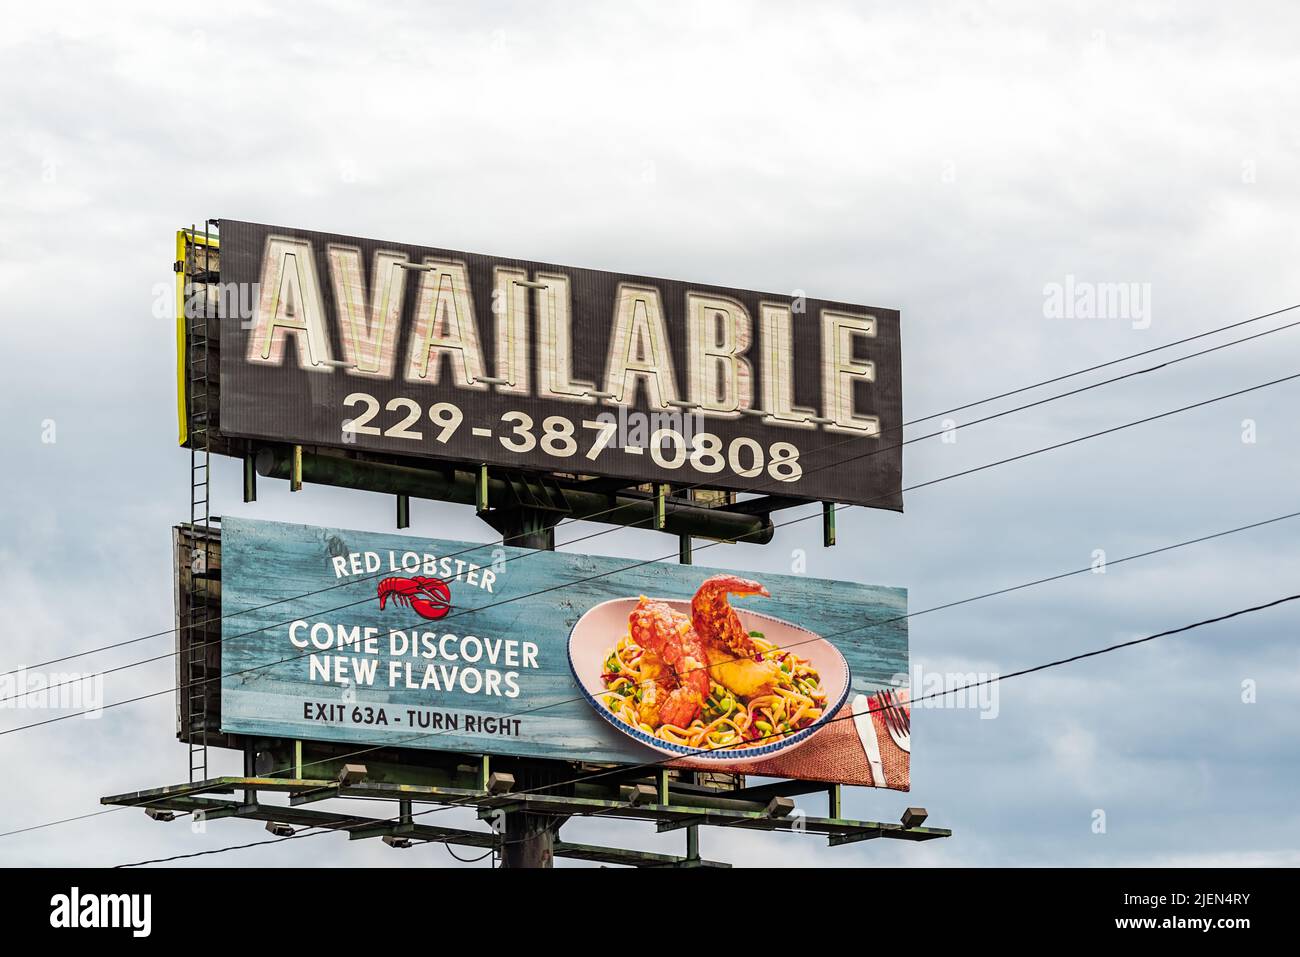 Tifton, USA - October 5, 2021: View of interstate i-75 sign billboard in Tifton, Georgia for available phone number and Red Lobster ad at exit 63a mil Stock Photo